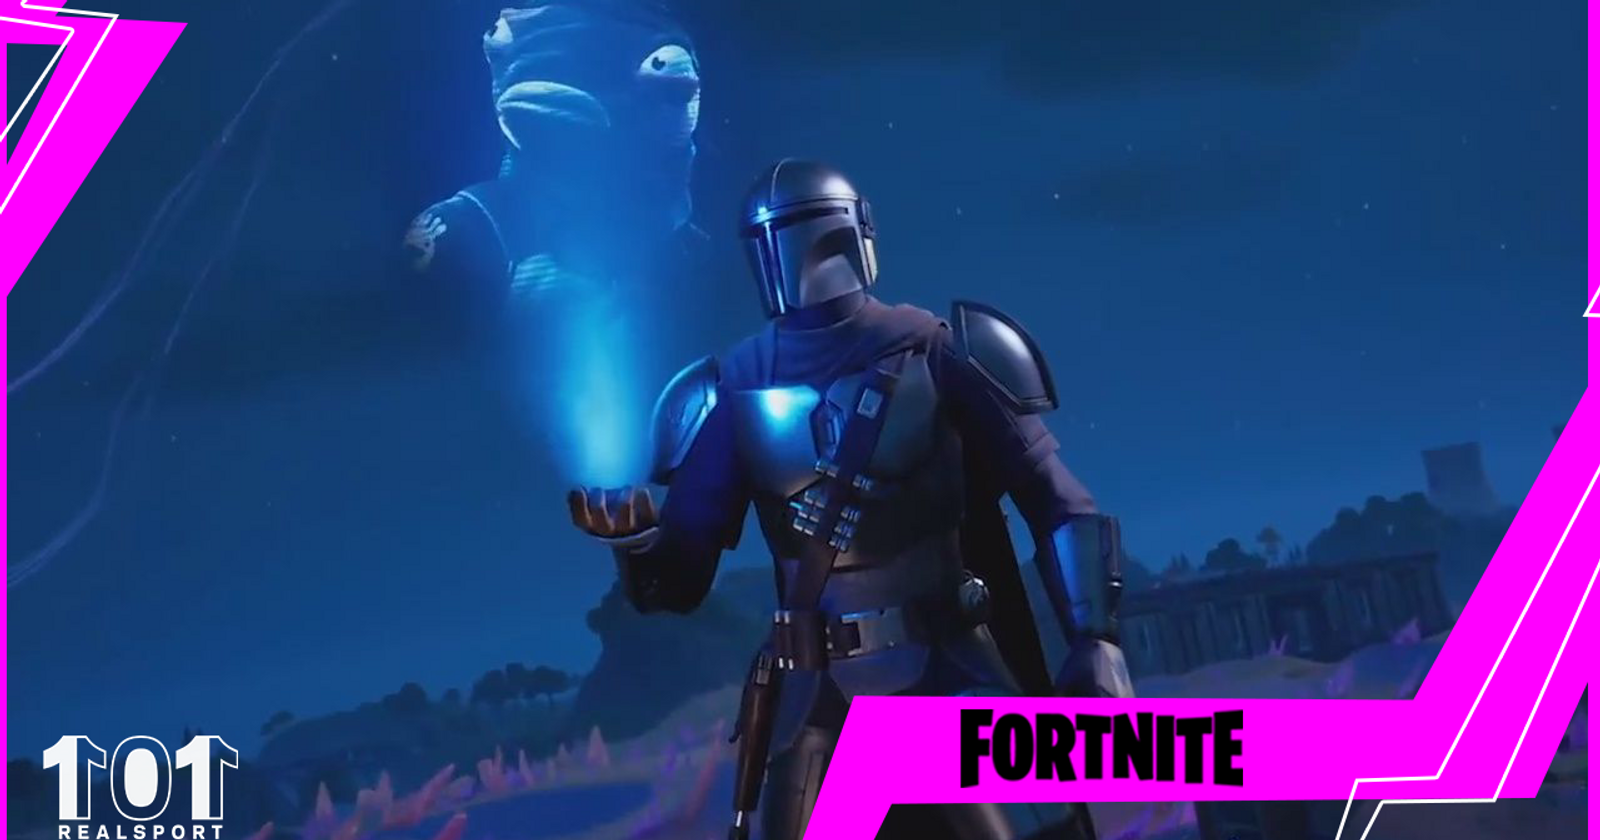 NEW* HOW TO PLAY FORTNITE WITHOUT XBOX LIVE IN 2019 (UPDATED VIDEO) 